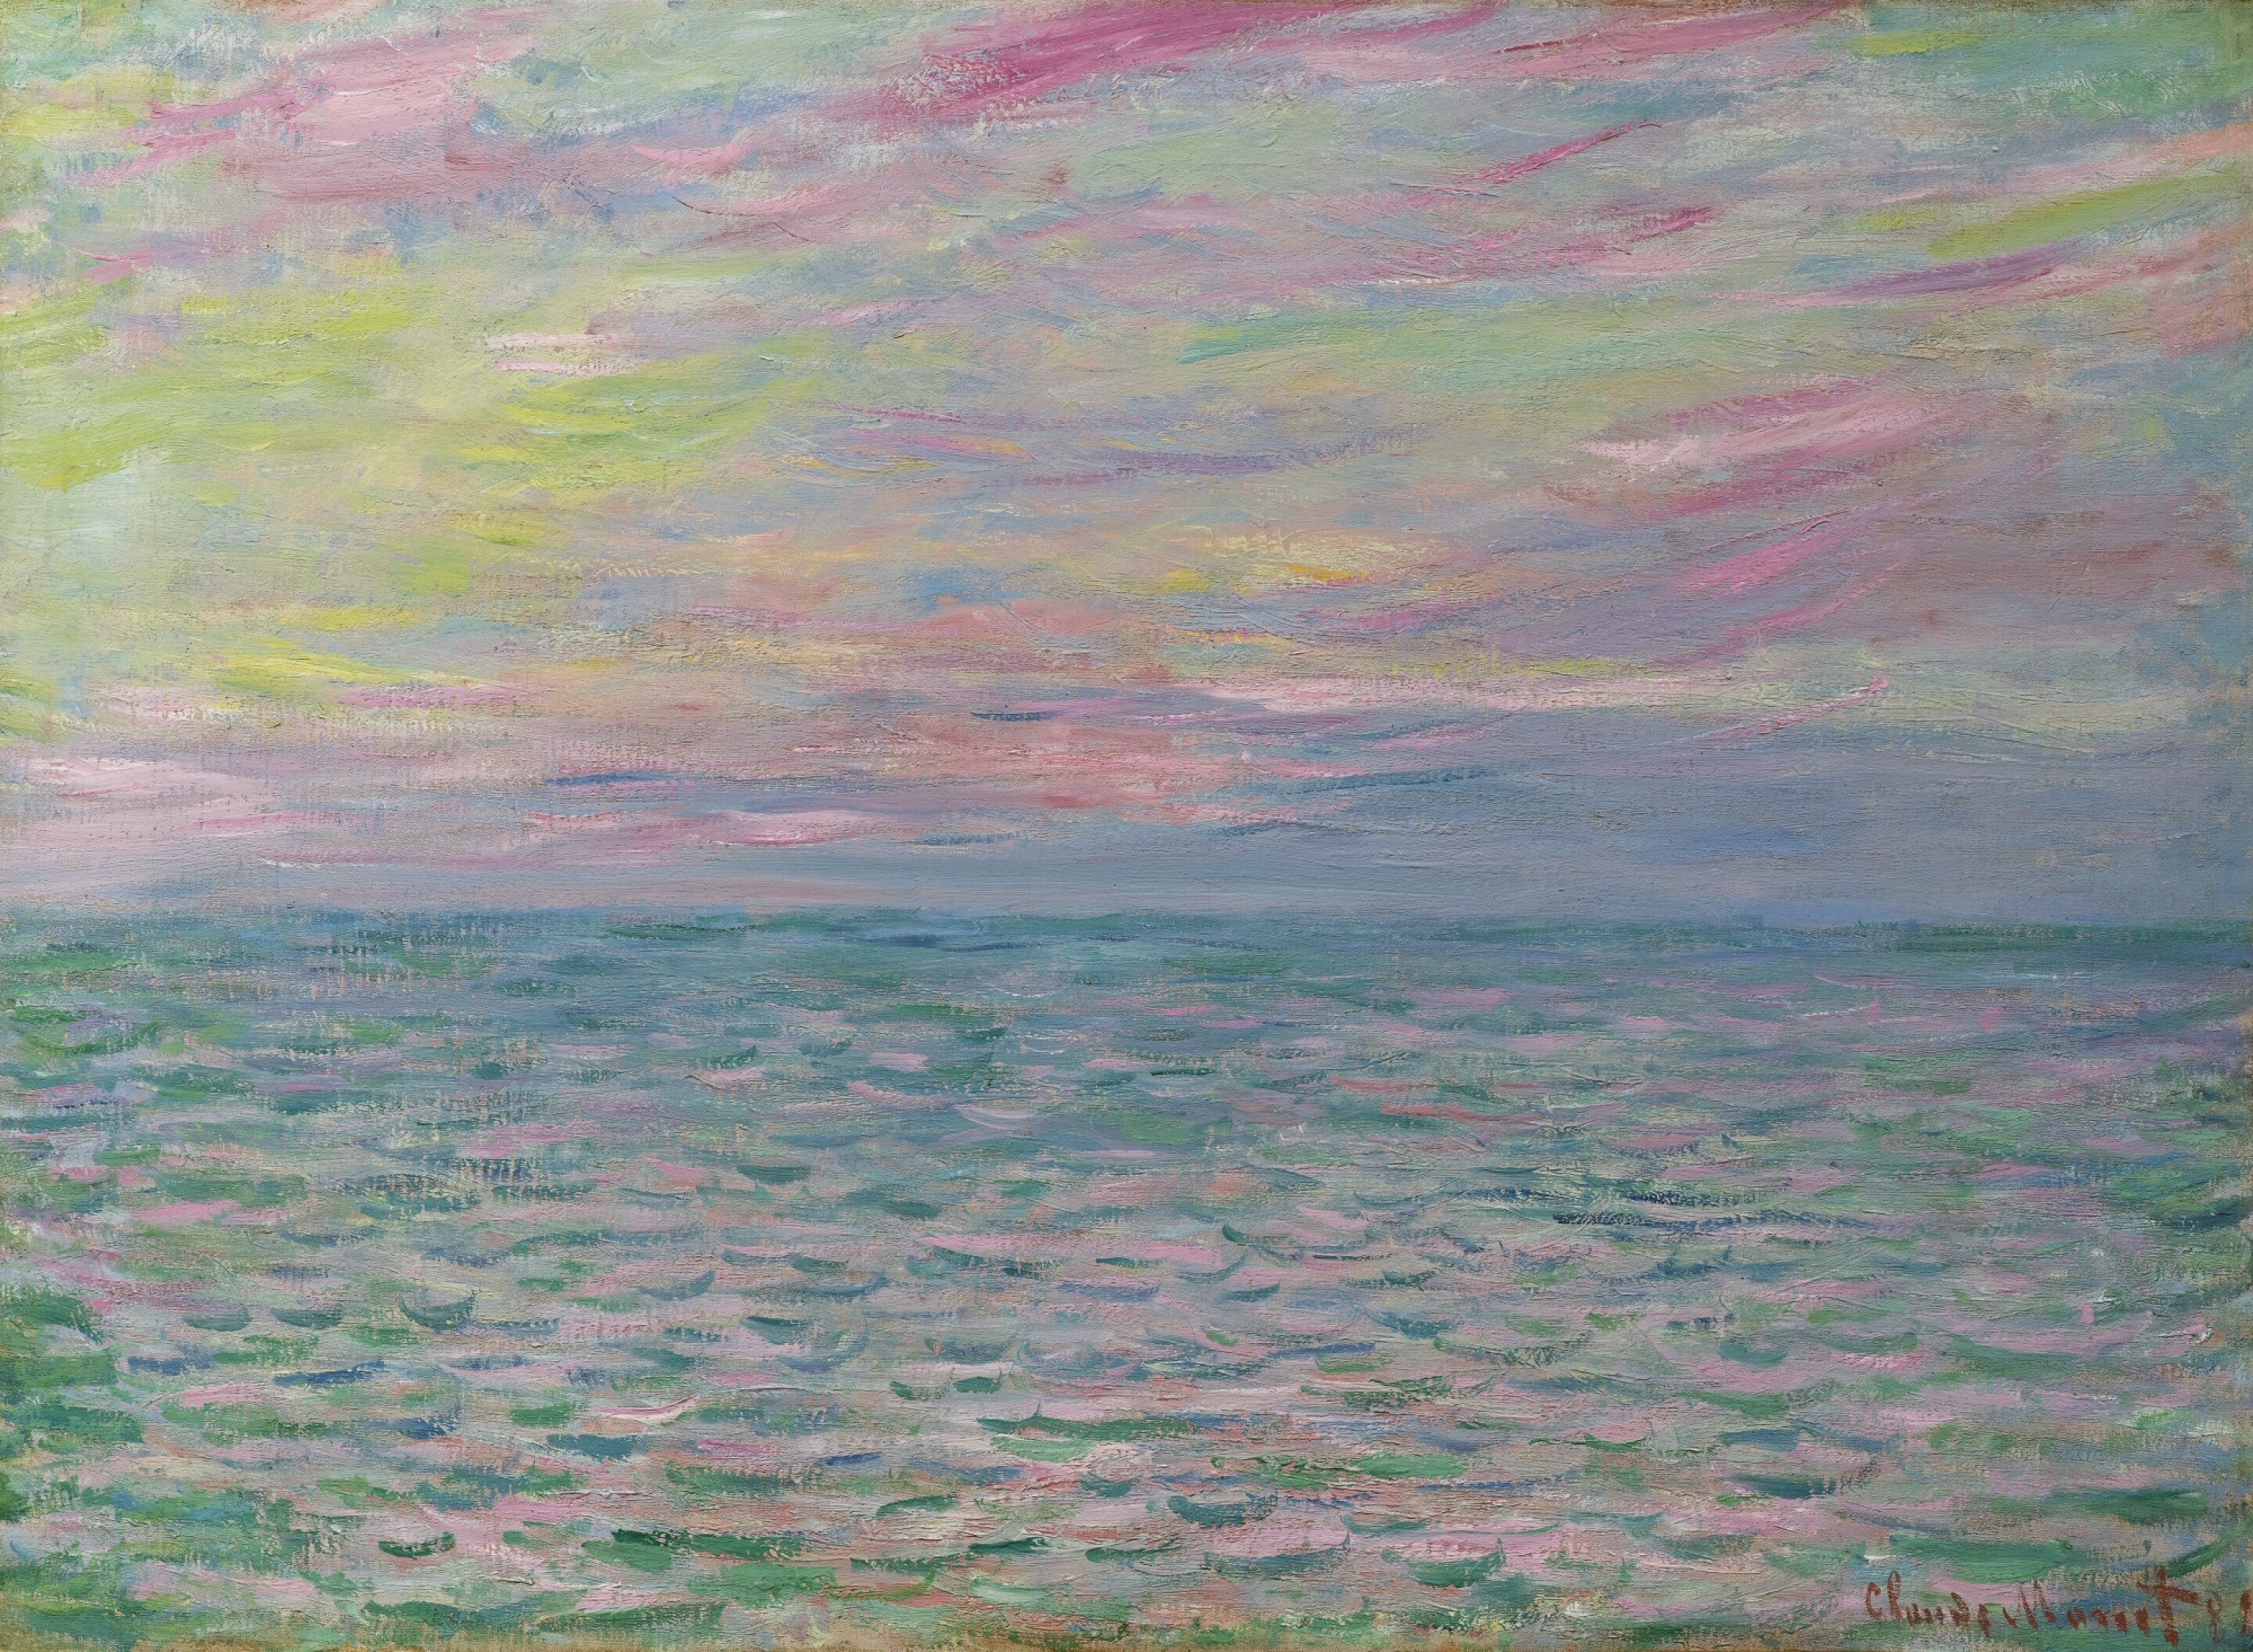 Sunset in Pourville, Open Sea by Claude Monet - 1882 - 54 by 73.5 cm private collection